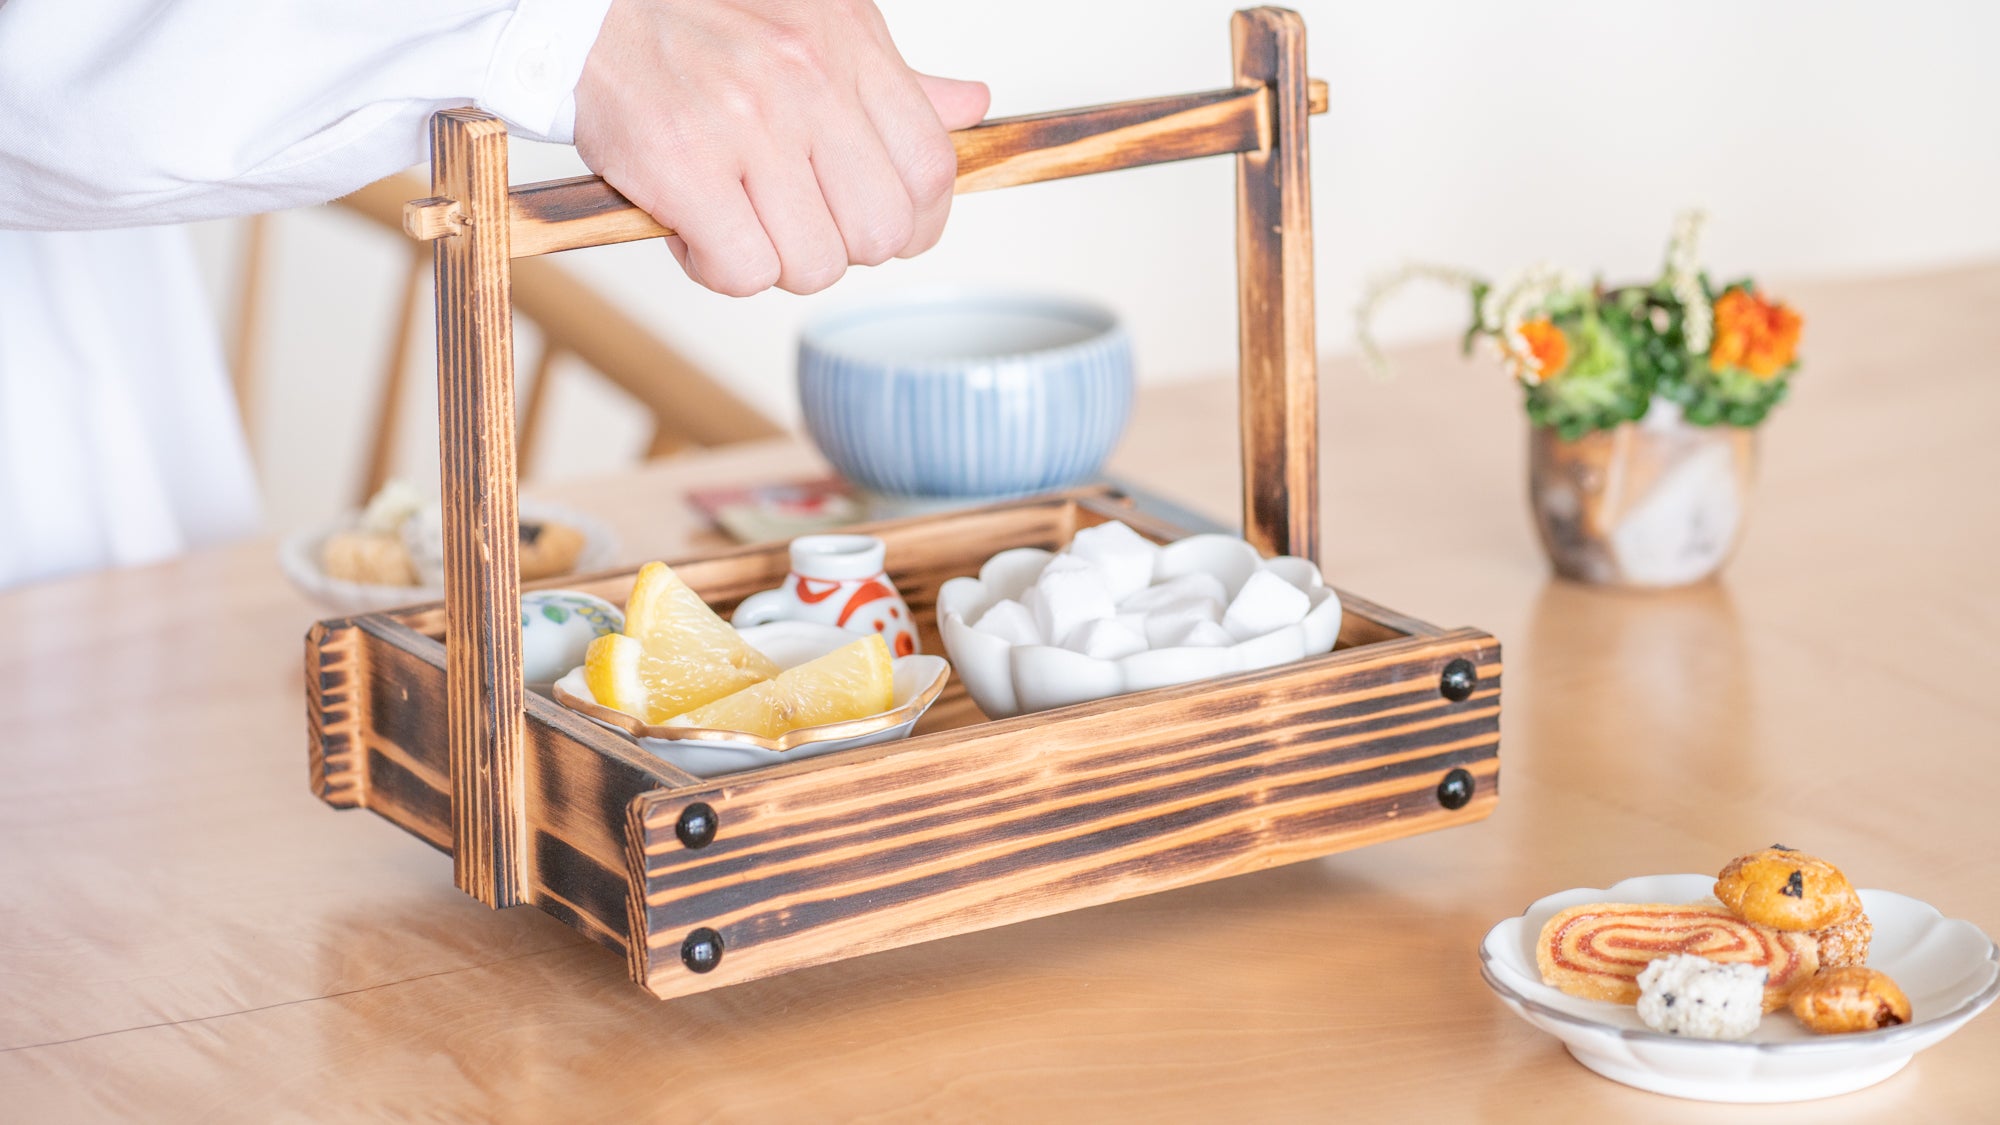 7 Actually Useful Table Accessories that You Didn’t Know You Needed